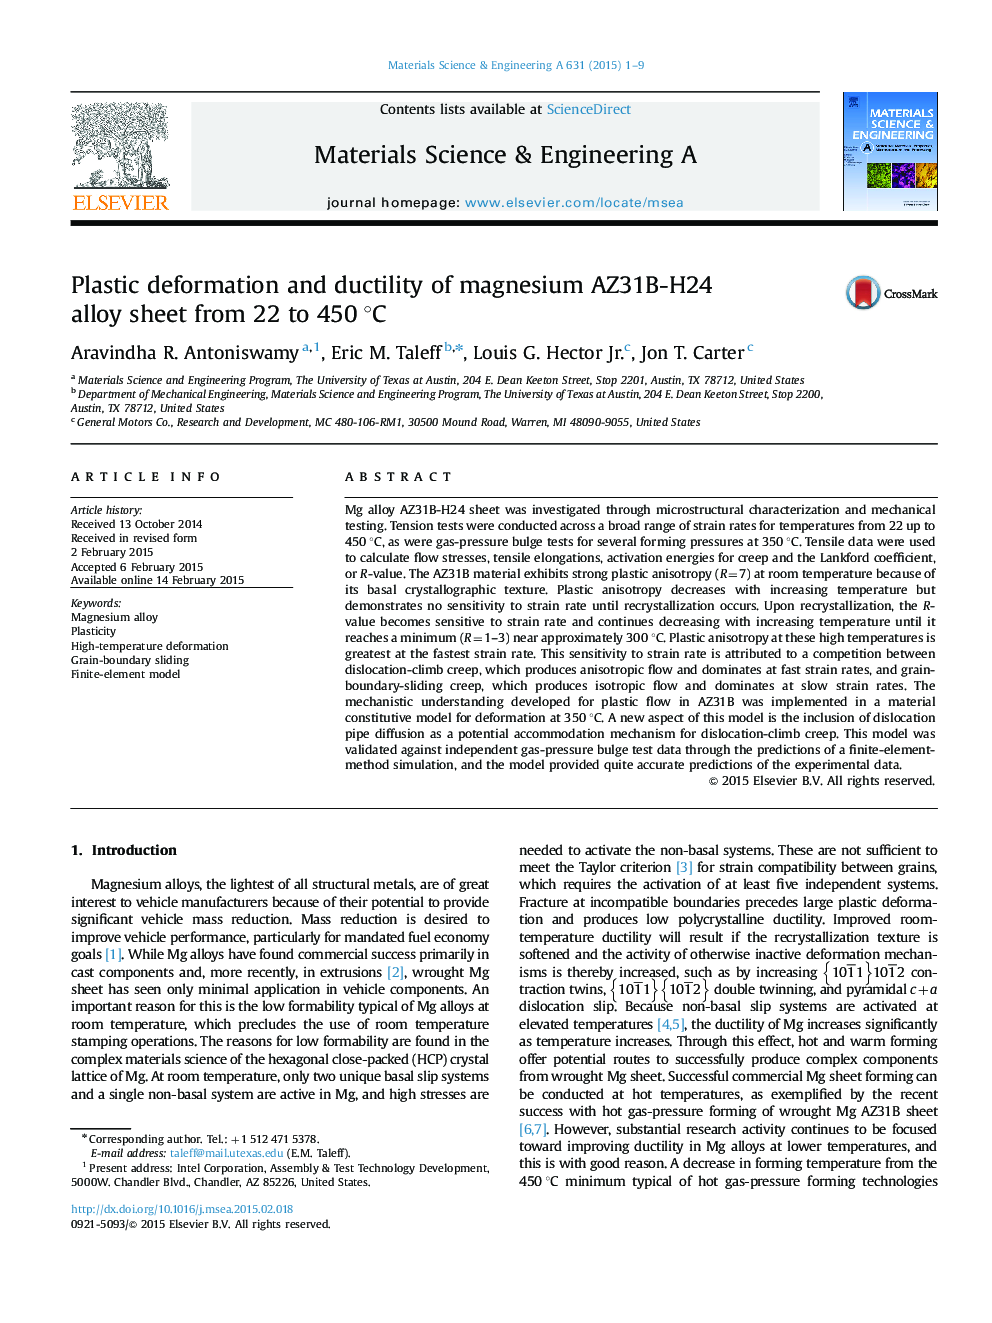 Plastic deformation and ductility of magnesium AZ31B-H24 alloy sheet from 22 to 450Â Â°C